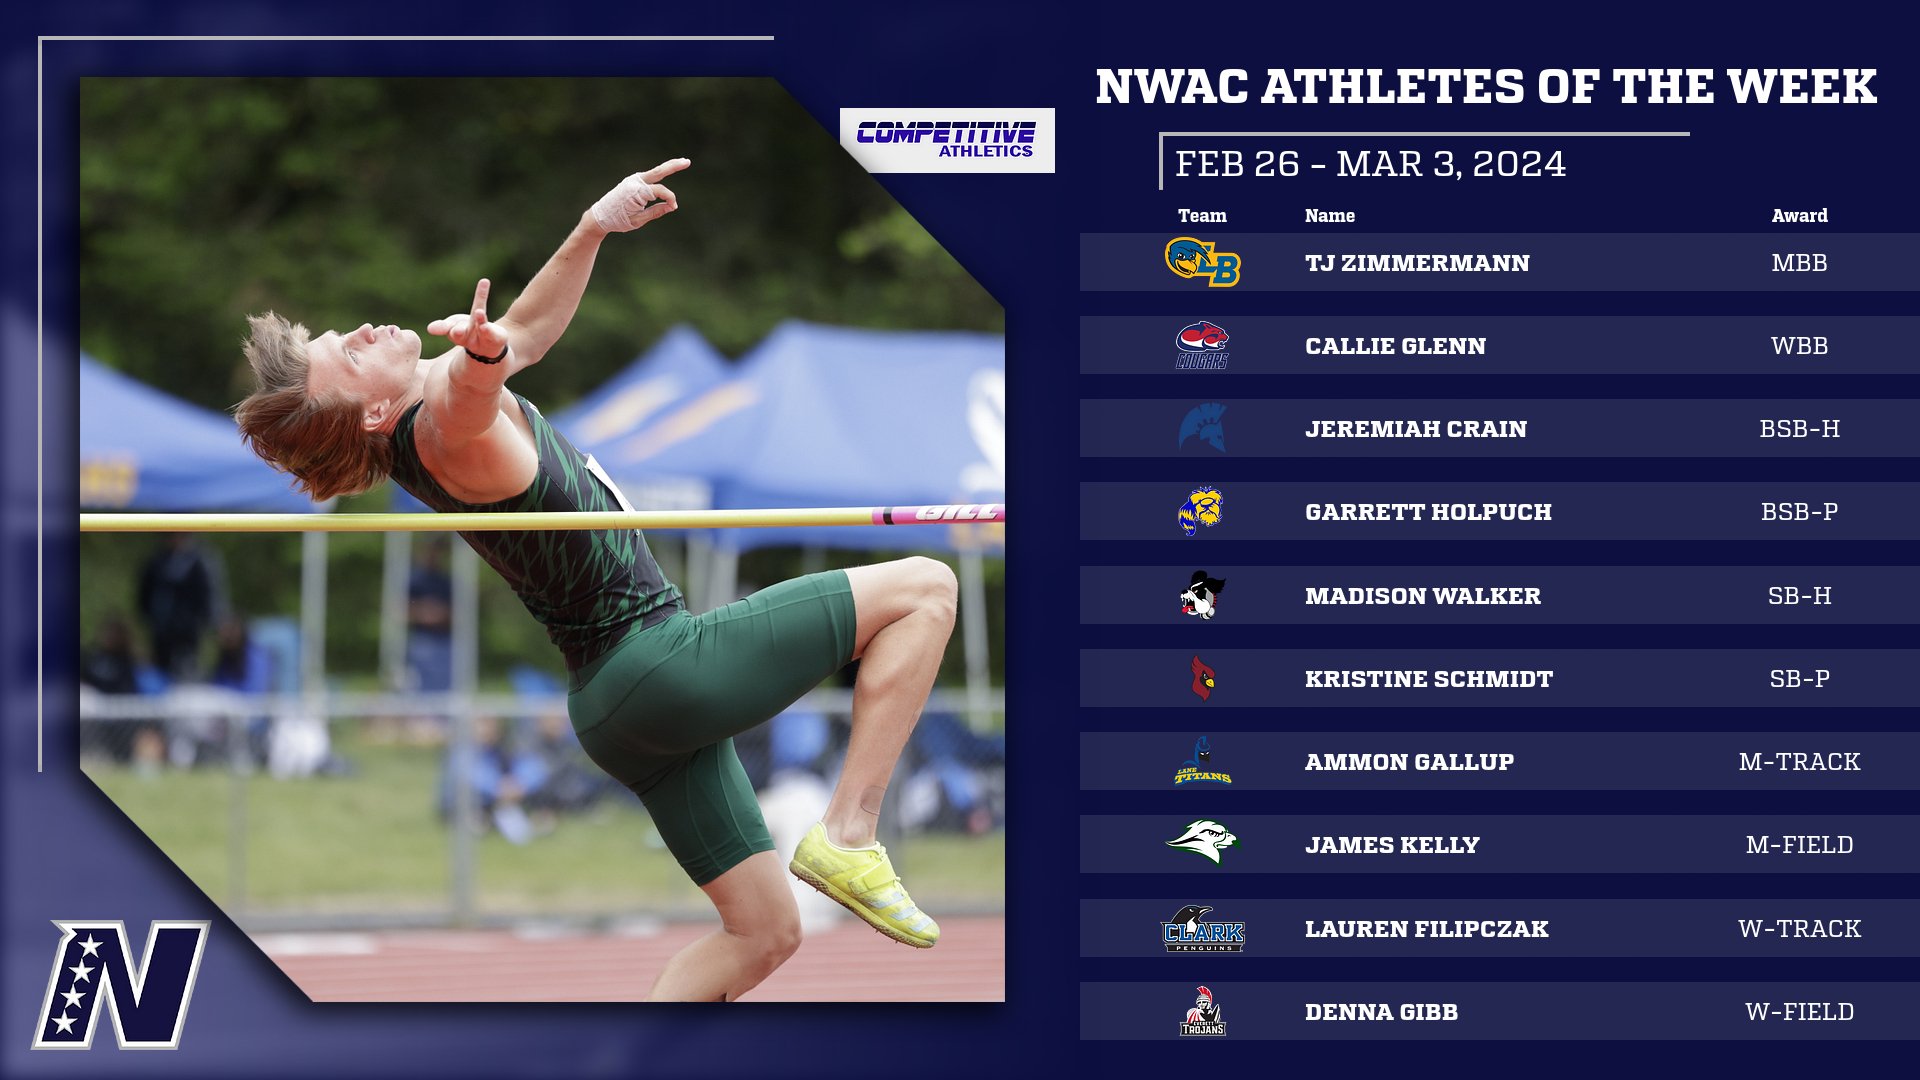 Competitive Athletics NWAC Athletes of the Week: Feb. 26 - March 3